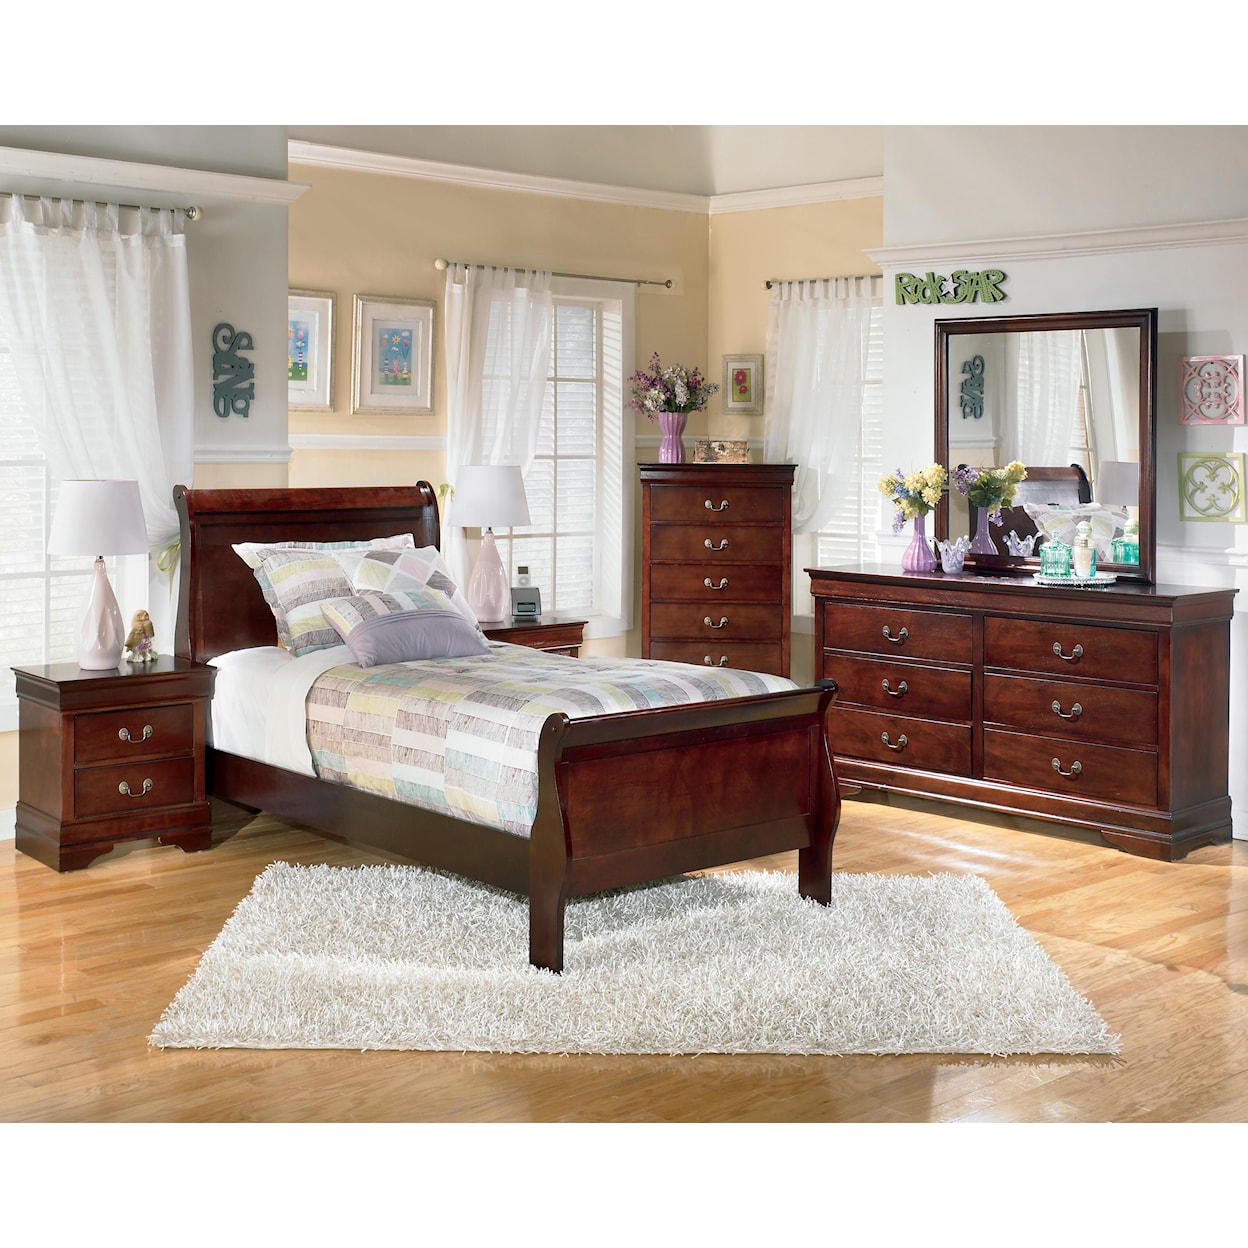 Signature Design by Ashley Alisdair 7pc Twin Bedroom Group